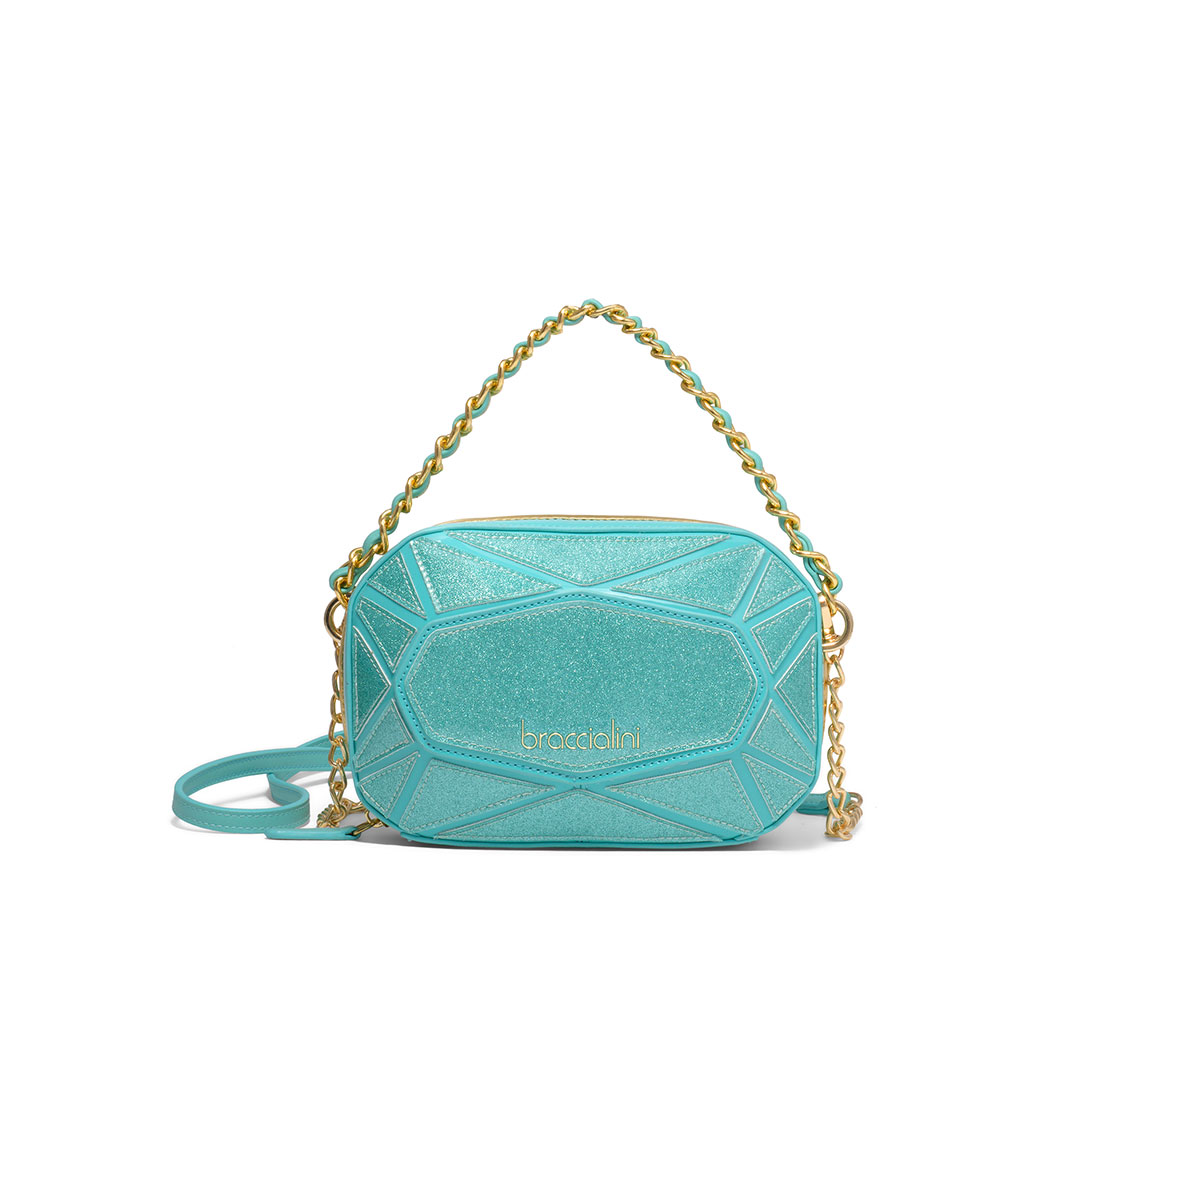 Tiffany Blue Quilted Leather Handbag